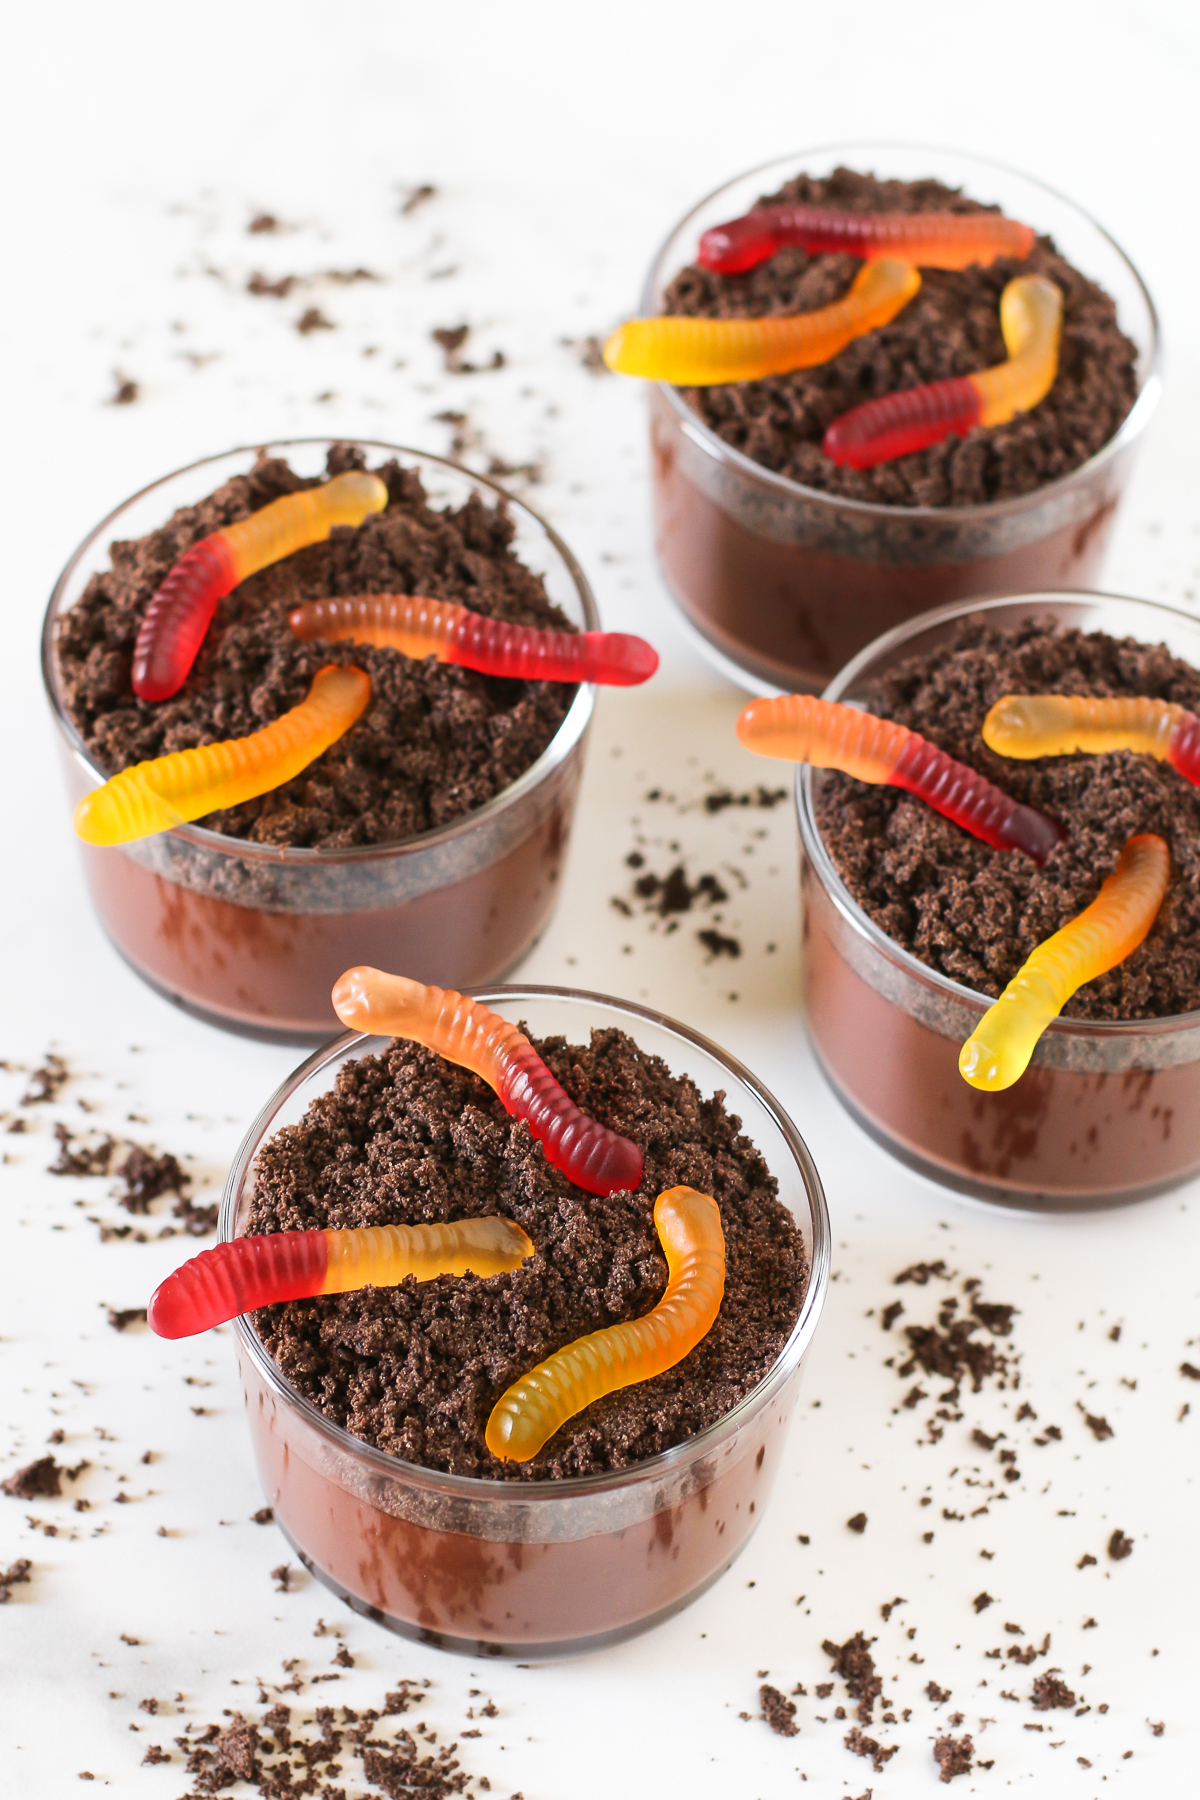 Gluten Free Dairy Free Dirt Cups. Creamy chocolate pudding topped with crushed chocolate cookie dirt. Can’t forget the gummy worms!